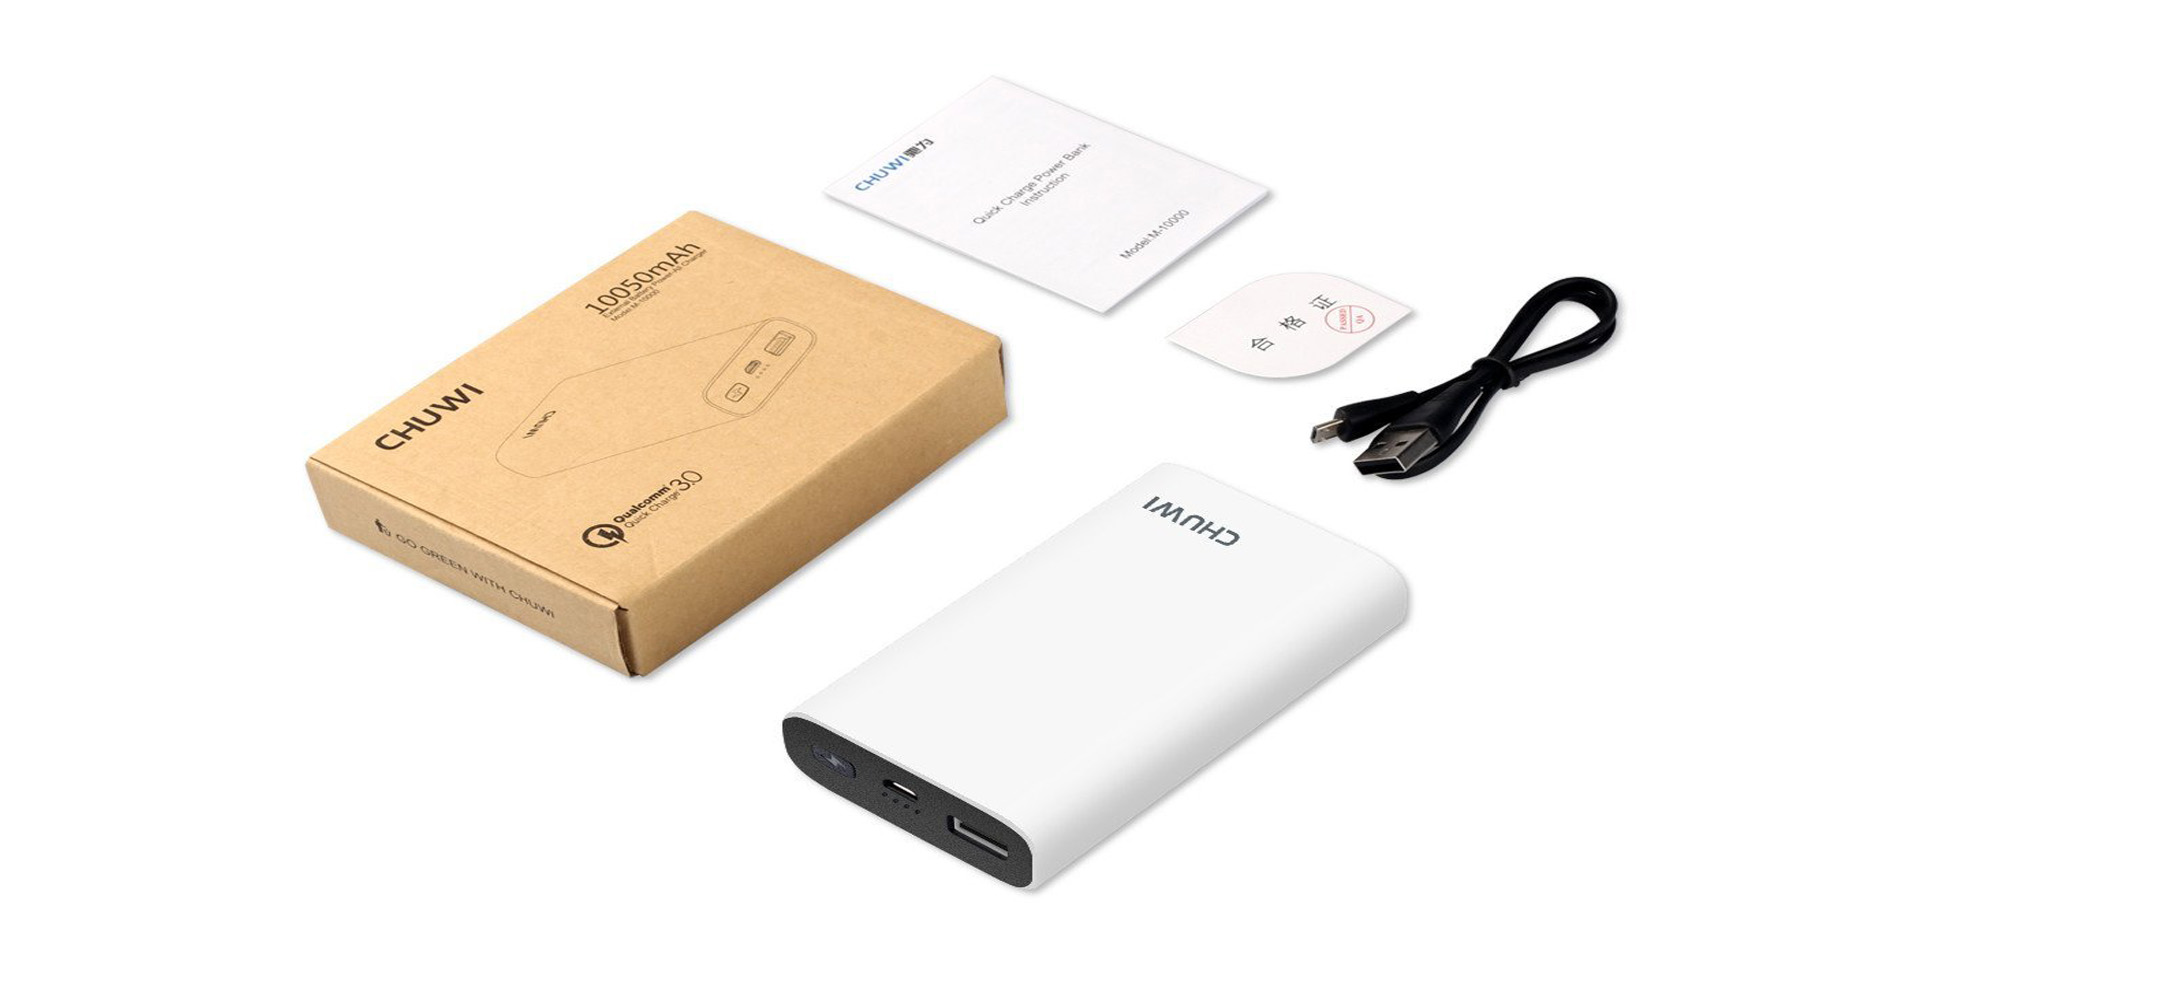 Qualcomm quick charge 10050mAh battery power bank for $17